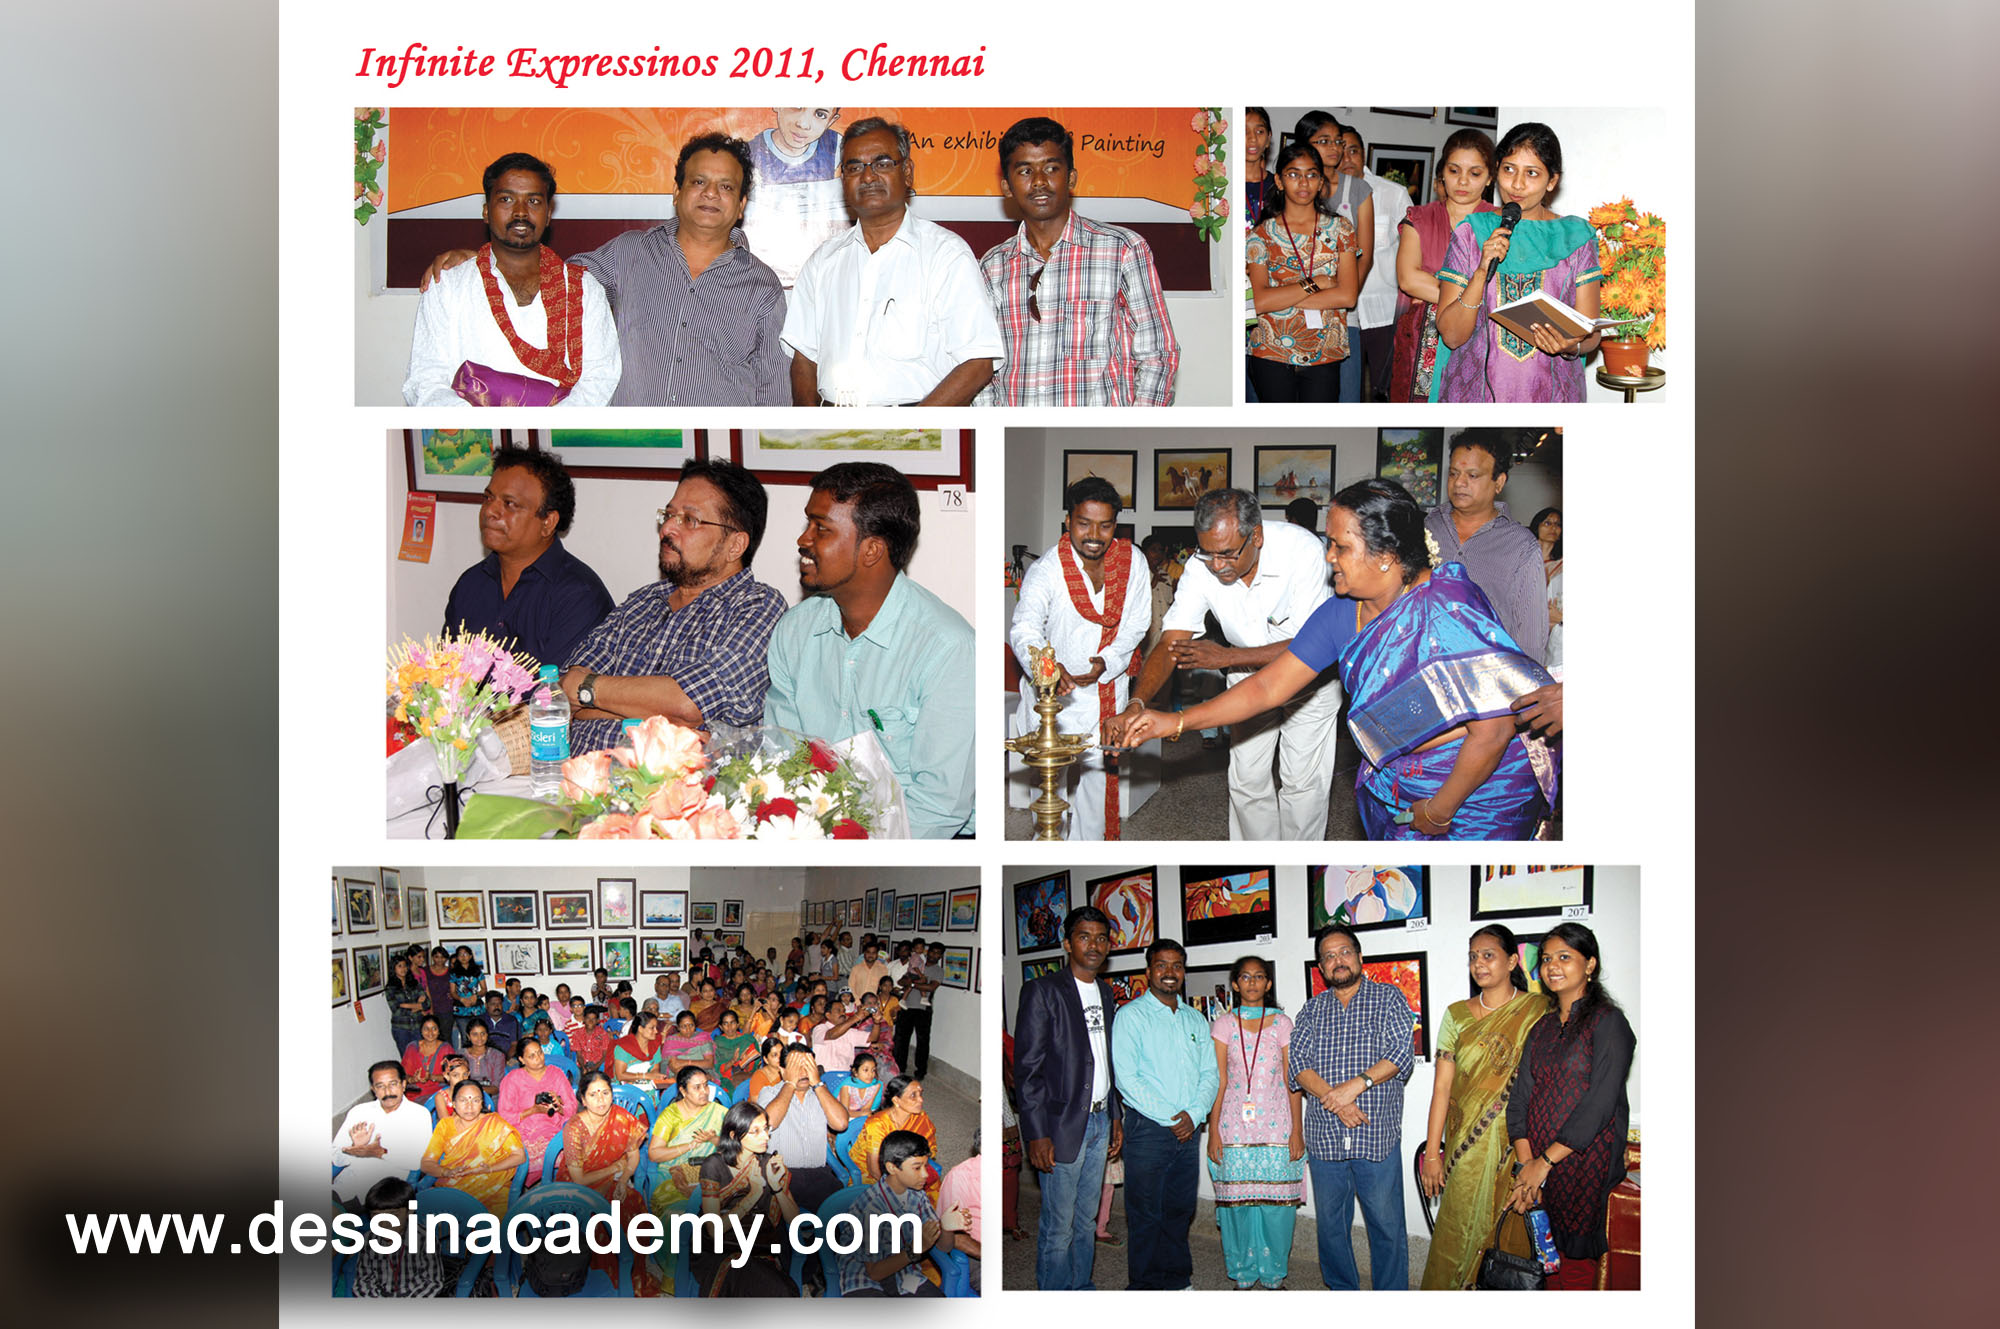 Dessin School of arts Event Gallery 5, Painting classes in ChennaiDessin School of Arts